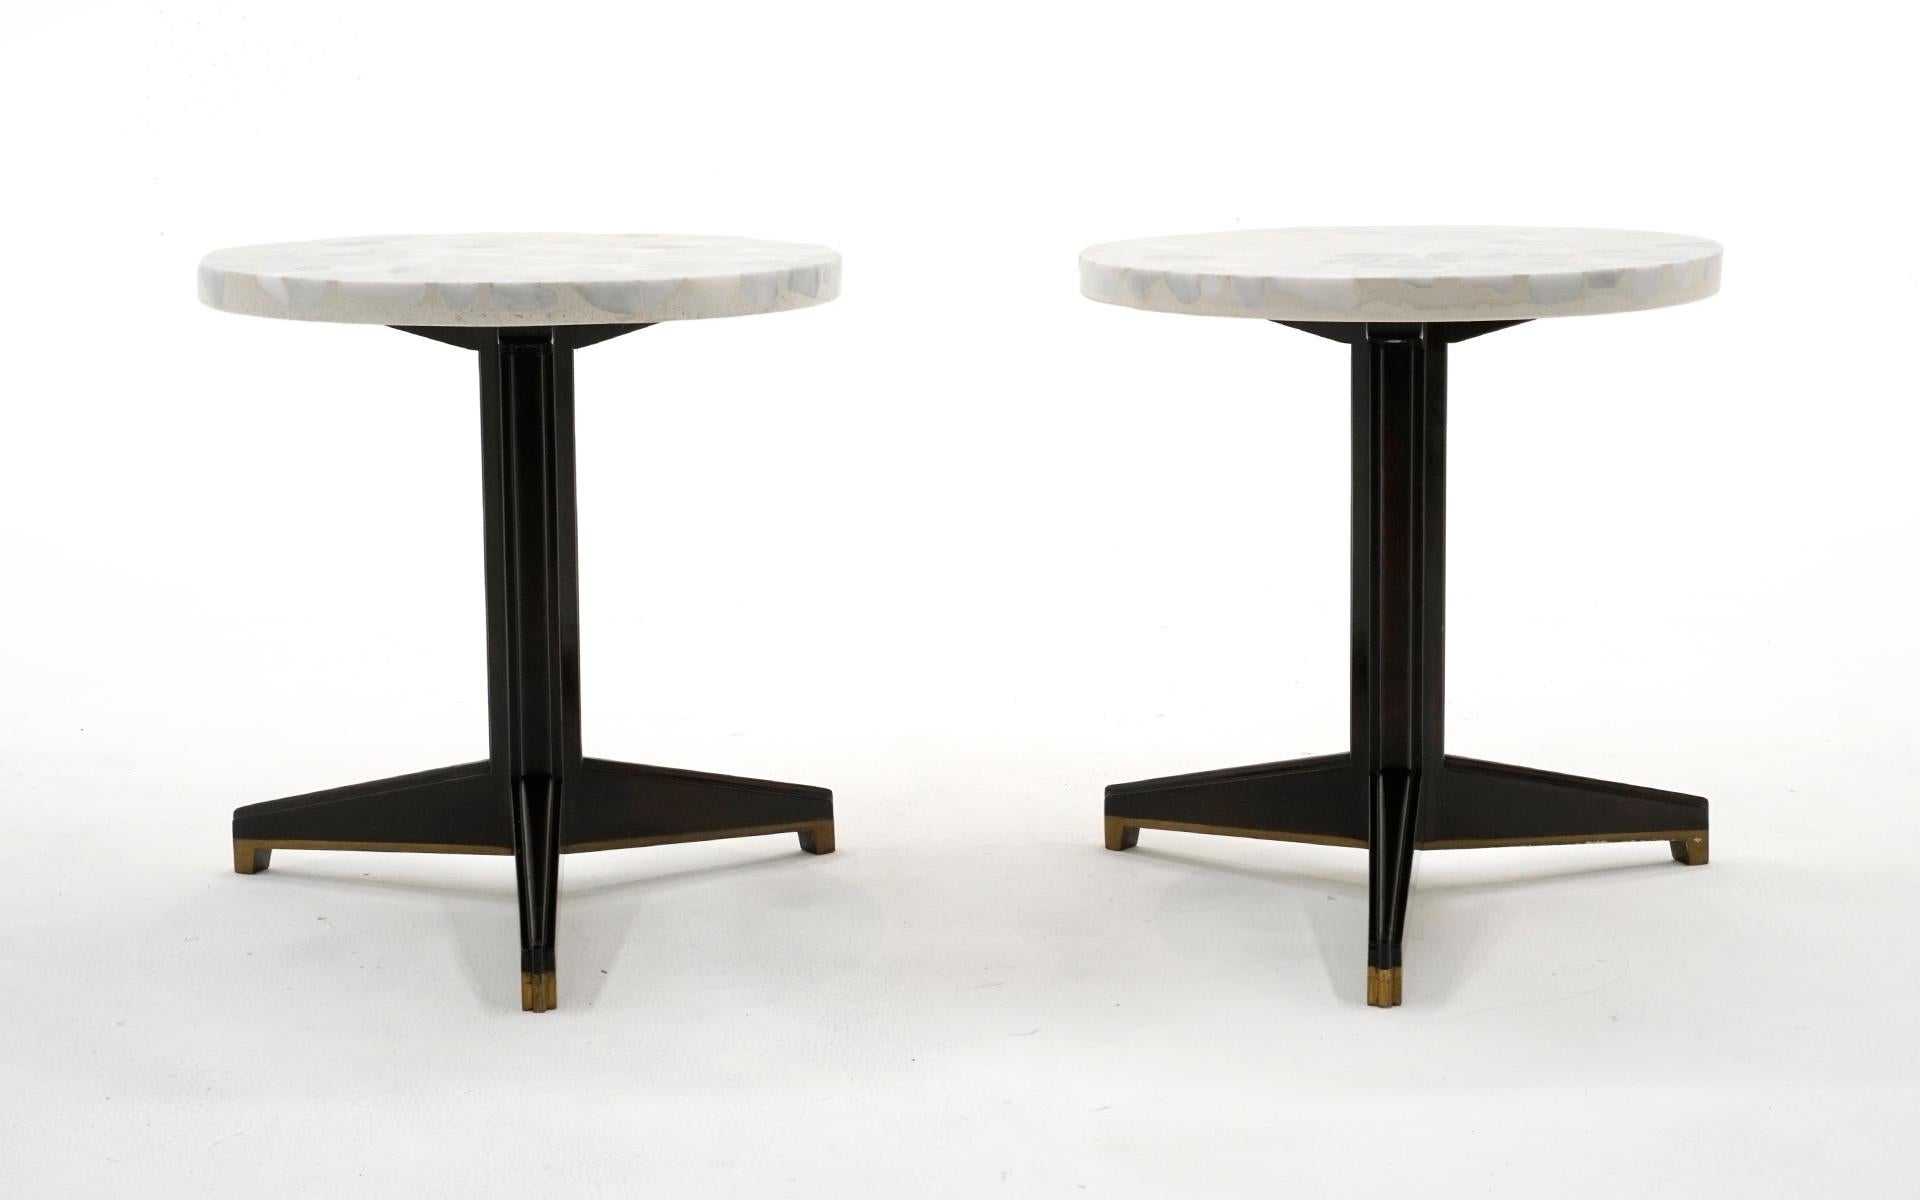 Very rare and desirable pair of Edward Wormley for Dunbar end tables. Round terrazzo tops with a solid Mahogany tripod base with solid brass support detail on the underside of the base structure. Both tops have been professionally polished and are